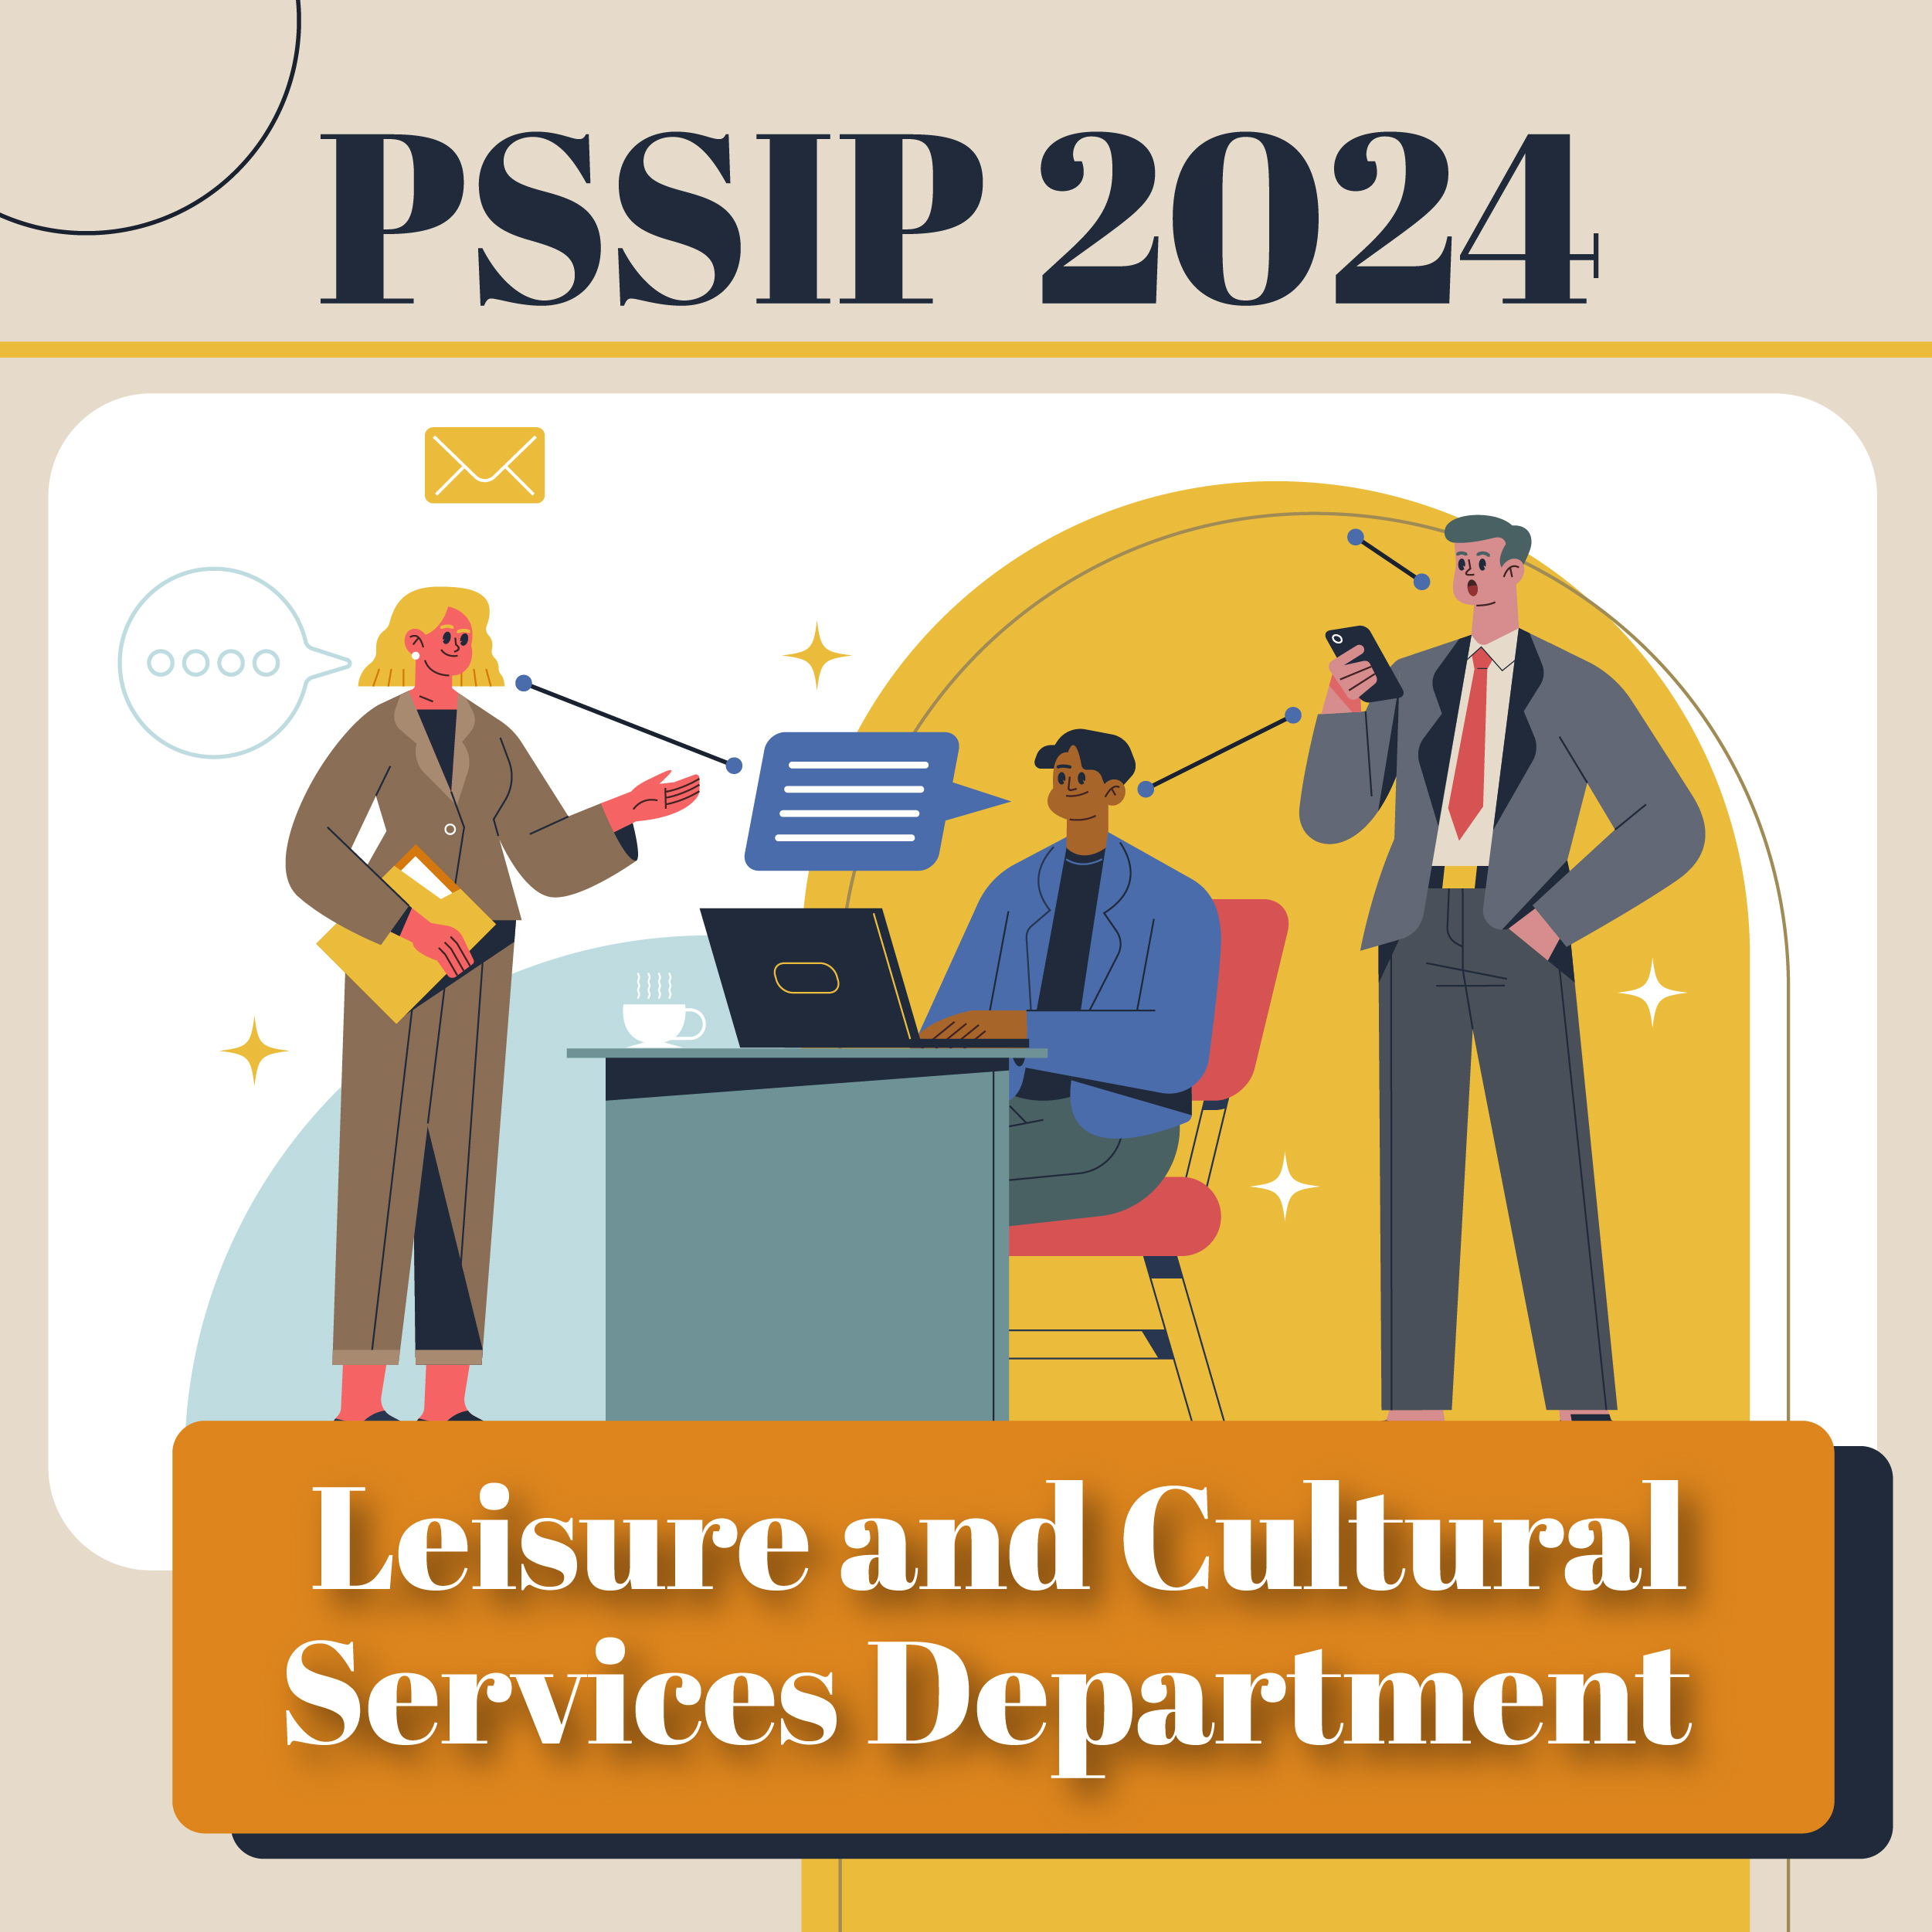 PSSIP2024 – Leisure and Cultural Services Department